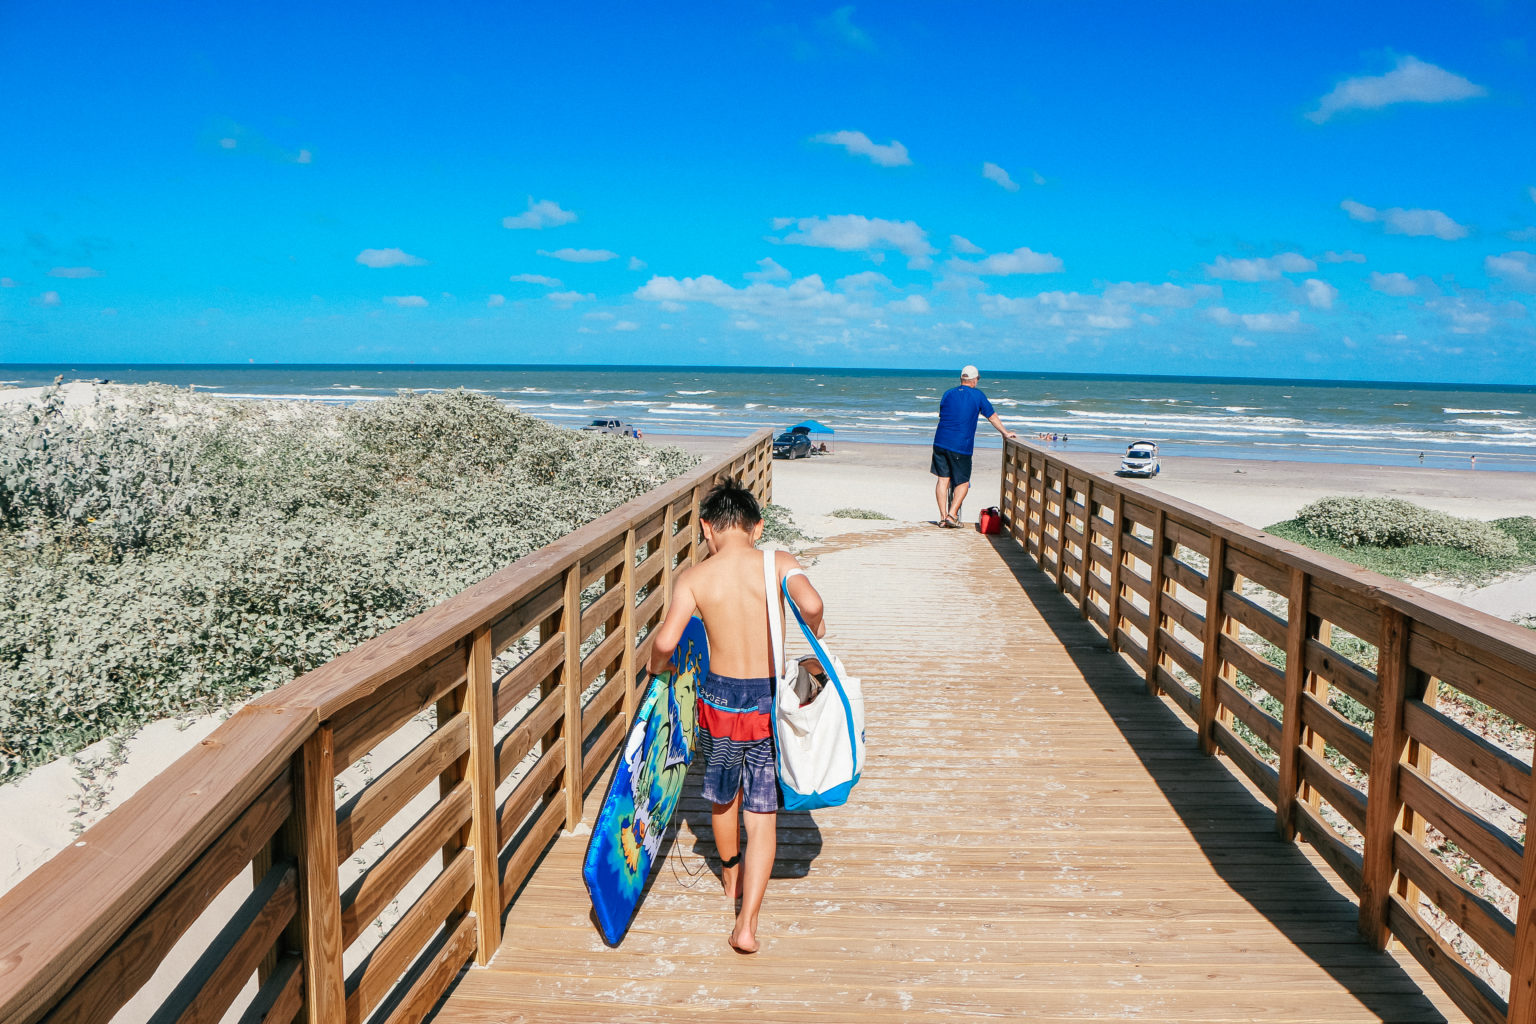 Best beaches in texas for families